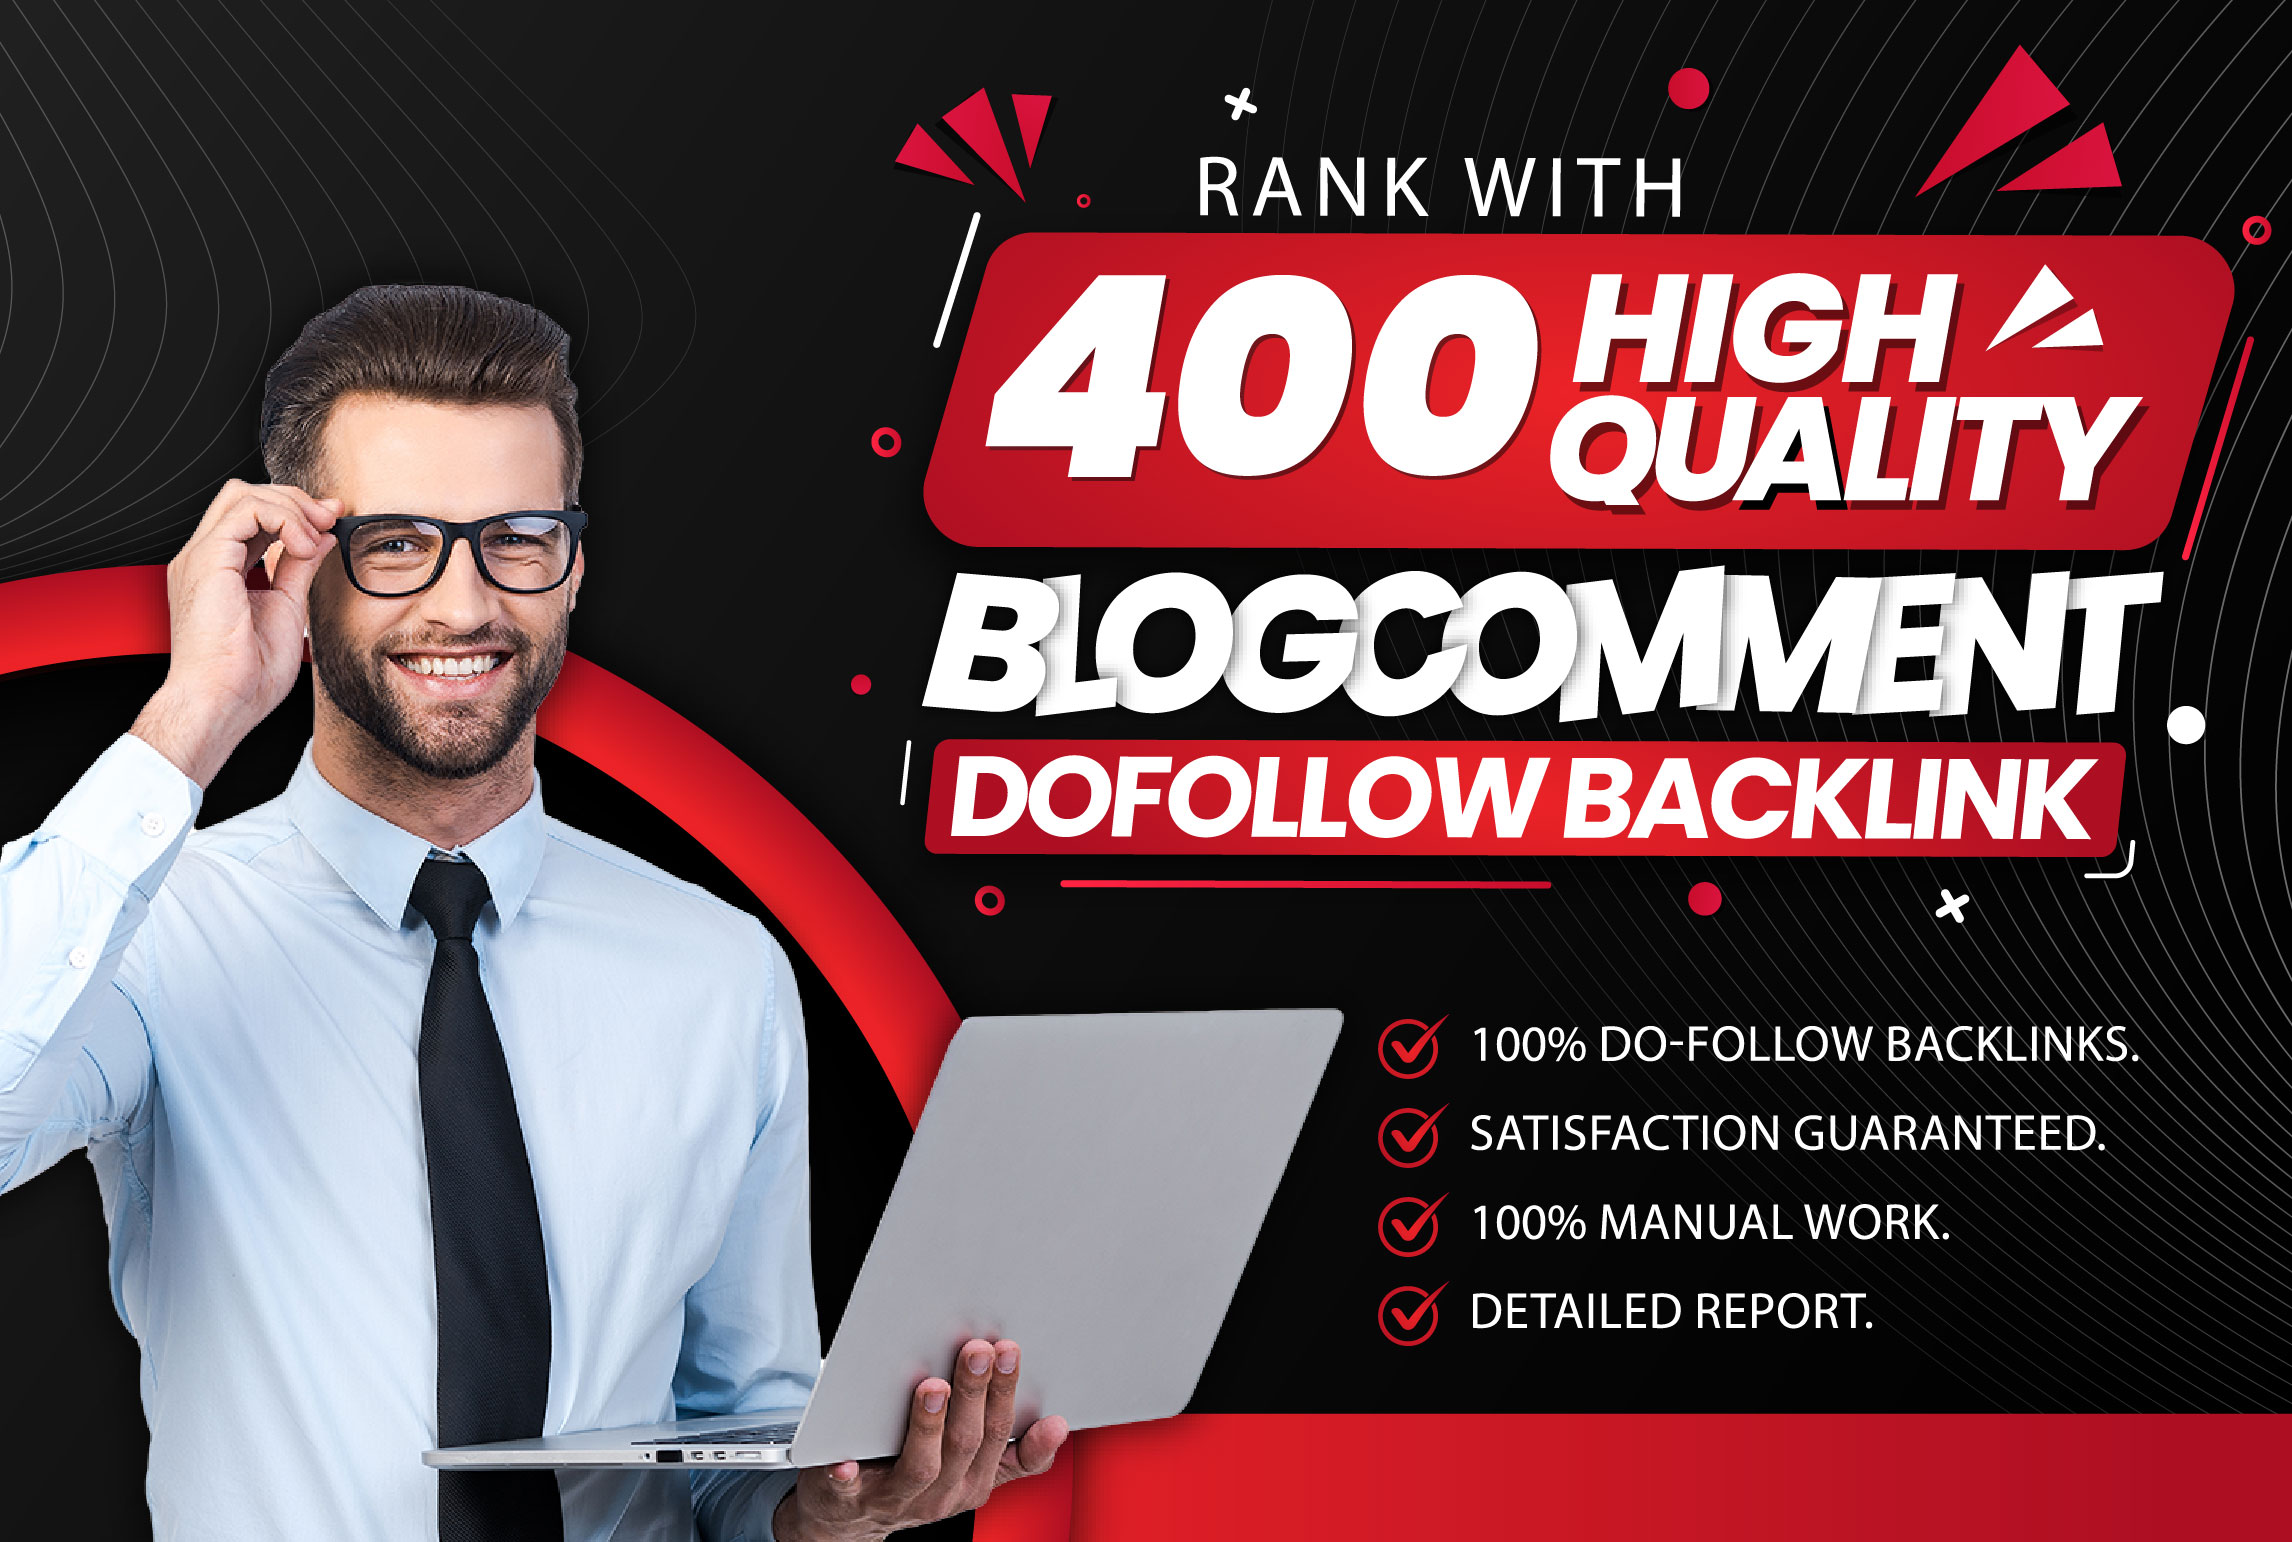 I will provide 400 high quality blog comment SEO backlinks